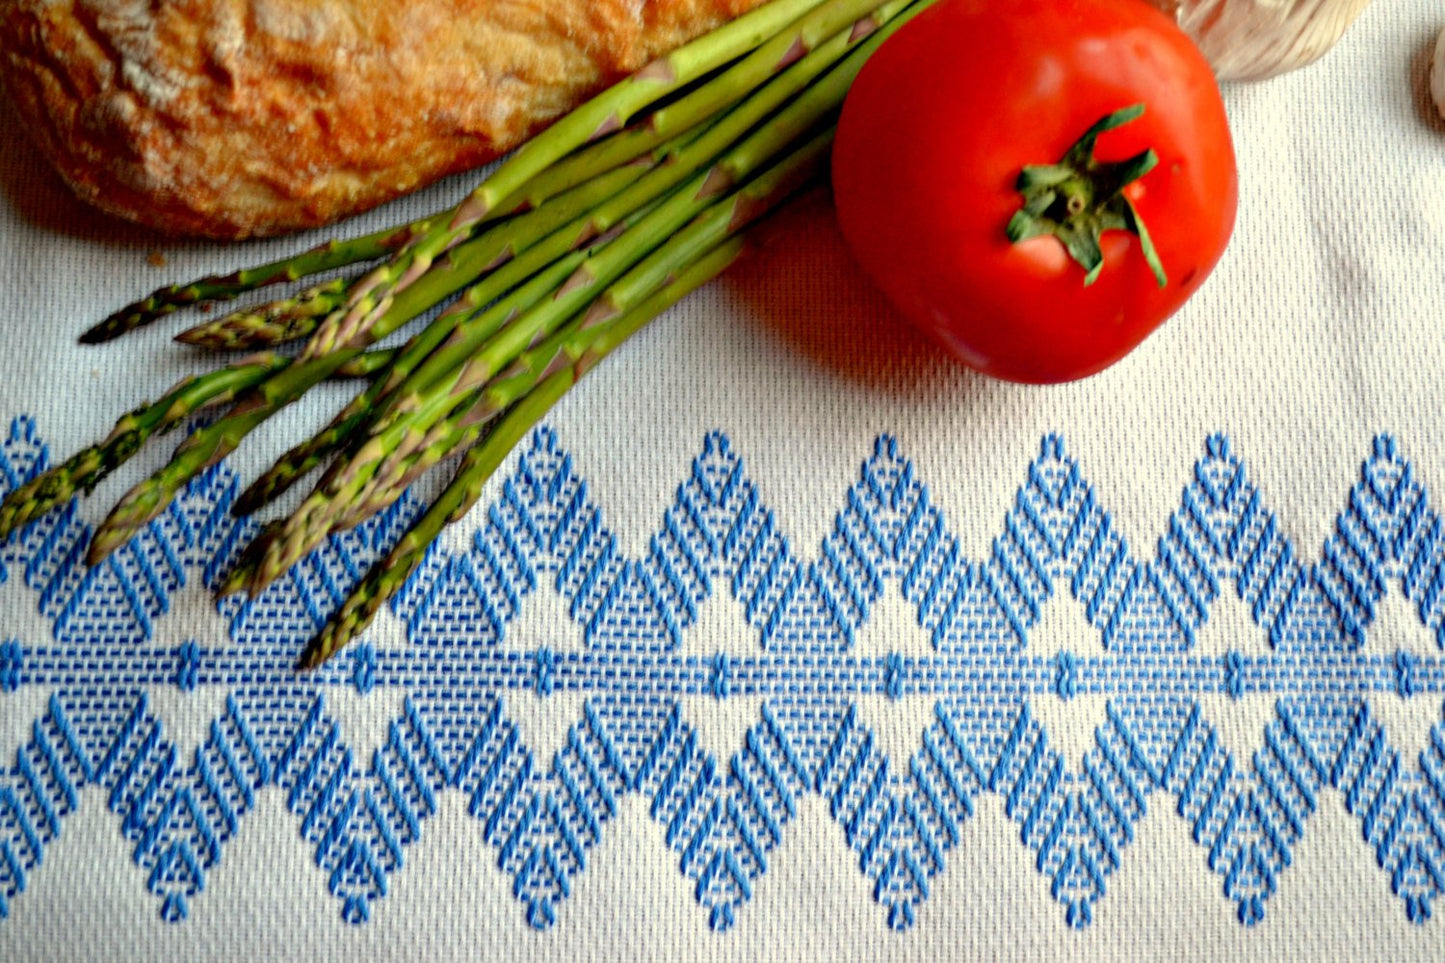 Hand embroidered white and blue tea towel with vegetables